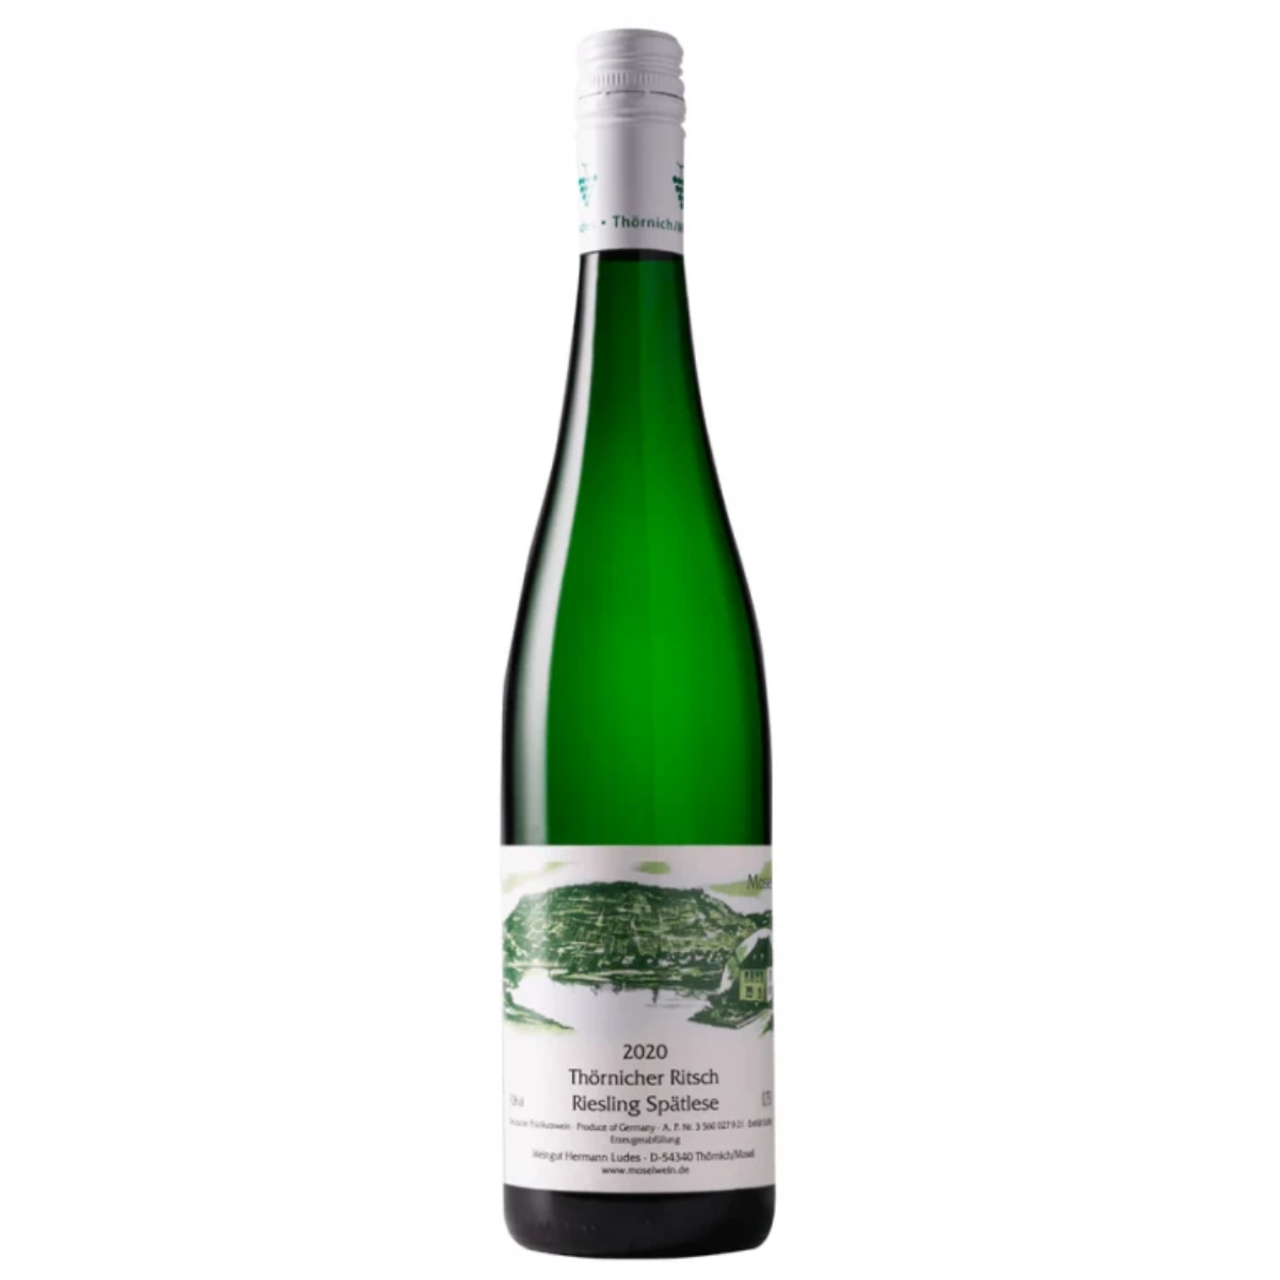 Hermann Ludes, Thornicher Ritsch Riesling Spatlese Mosel 2020 - Vinous  Reverie